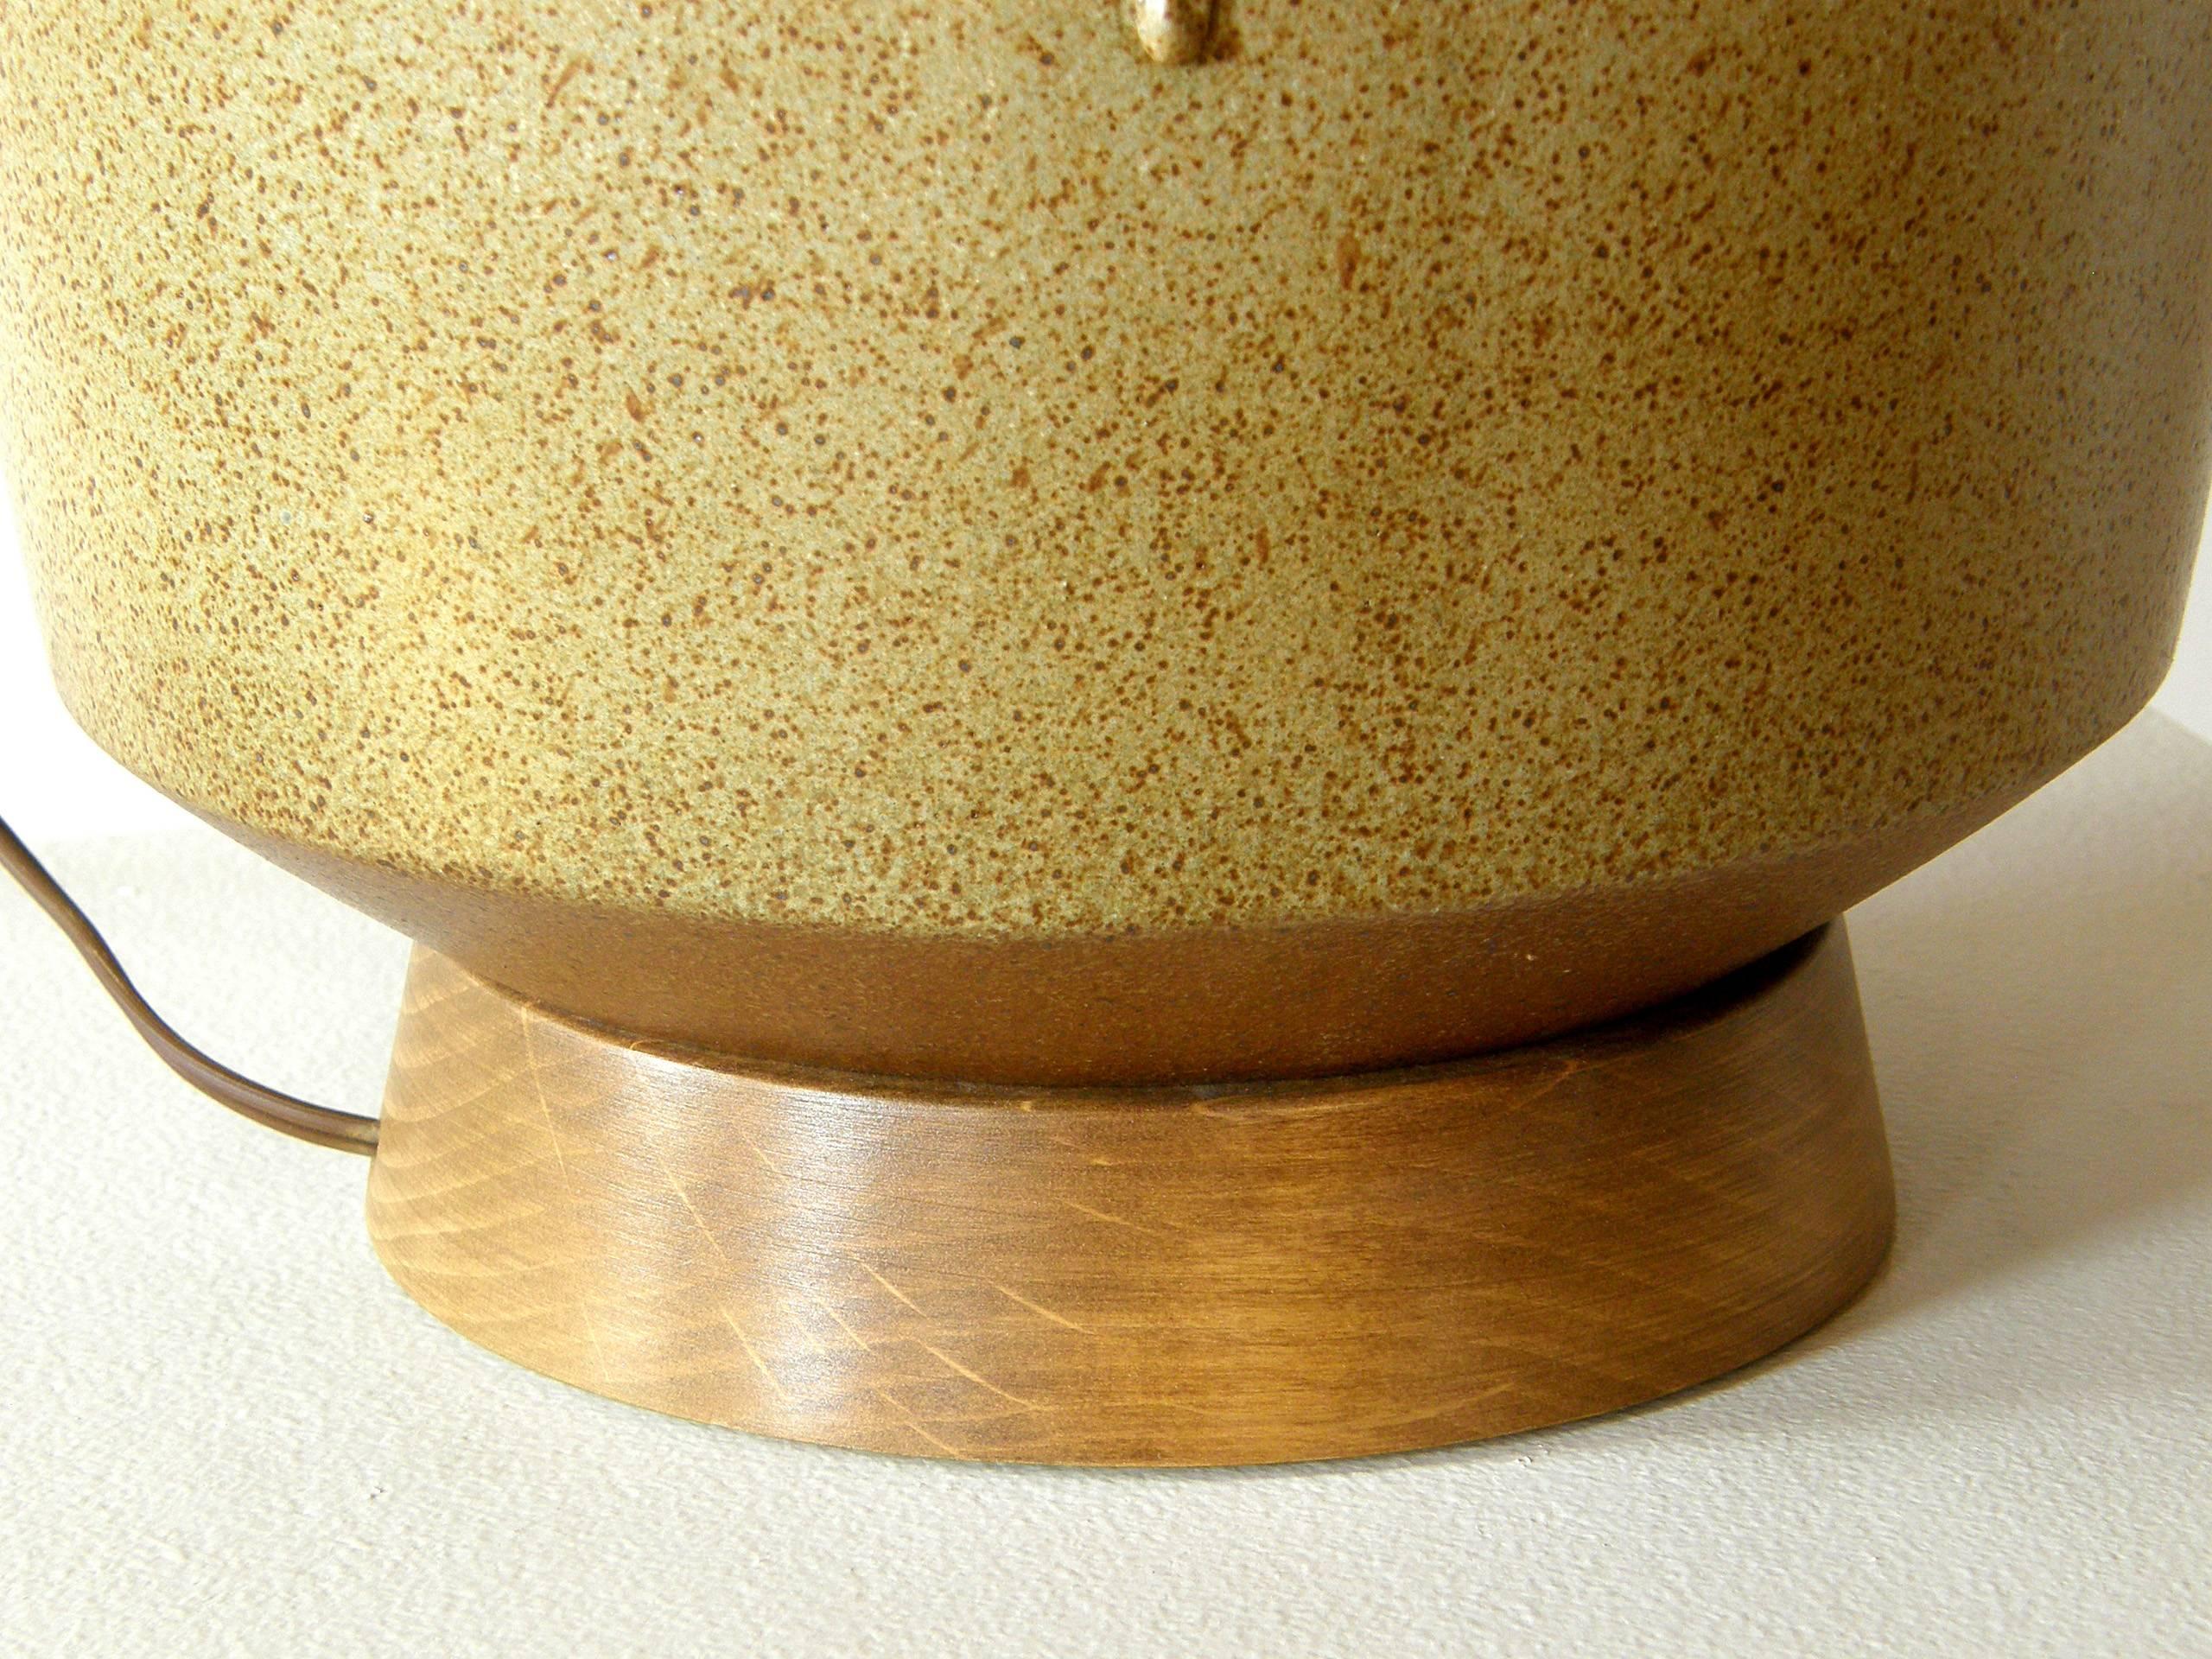 David Cressey Ceramic Table Lamp for Architectural Pottery with Textured Surface In Good Condition For Sale In Chicago, IL